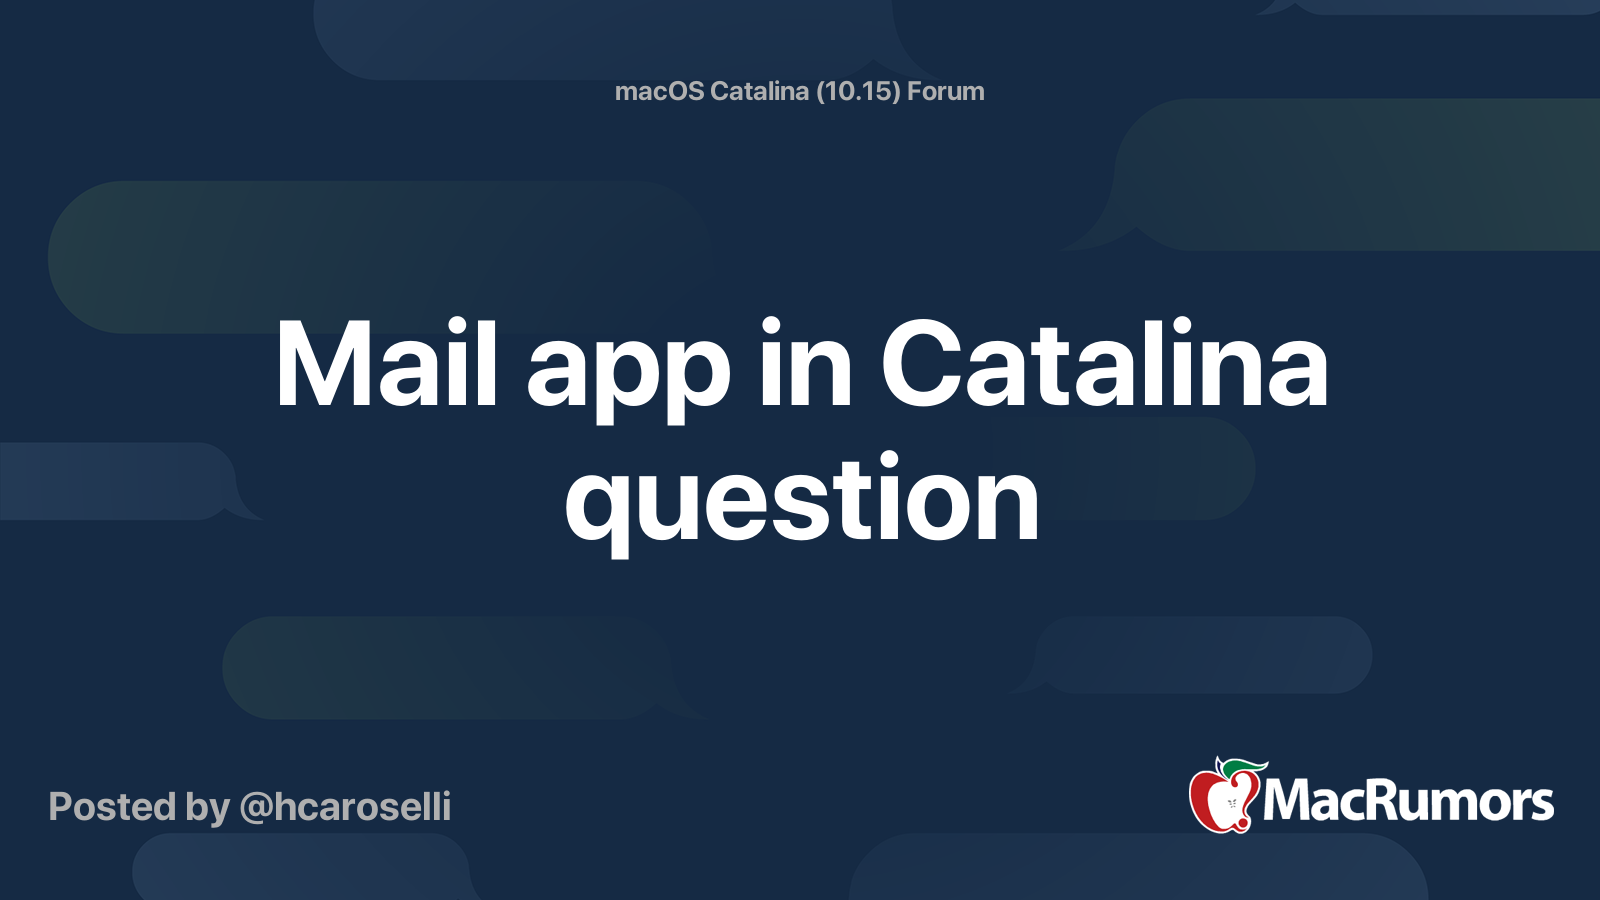 mail-app-in-catalina-question-macrumors-forums